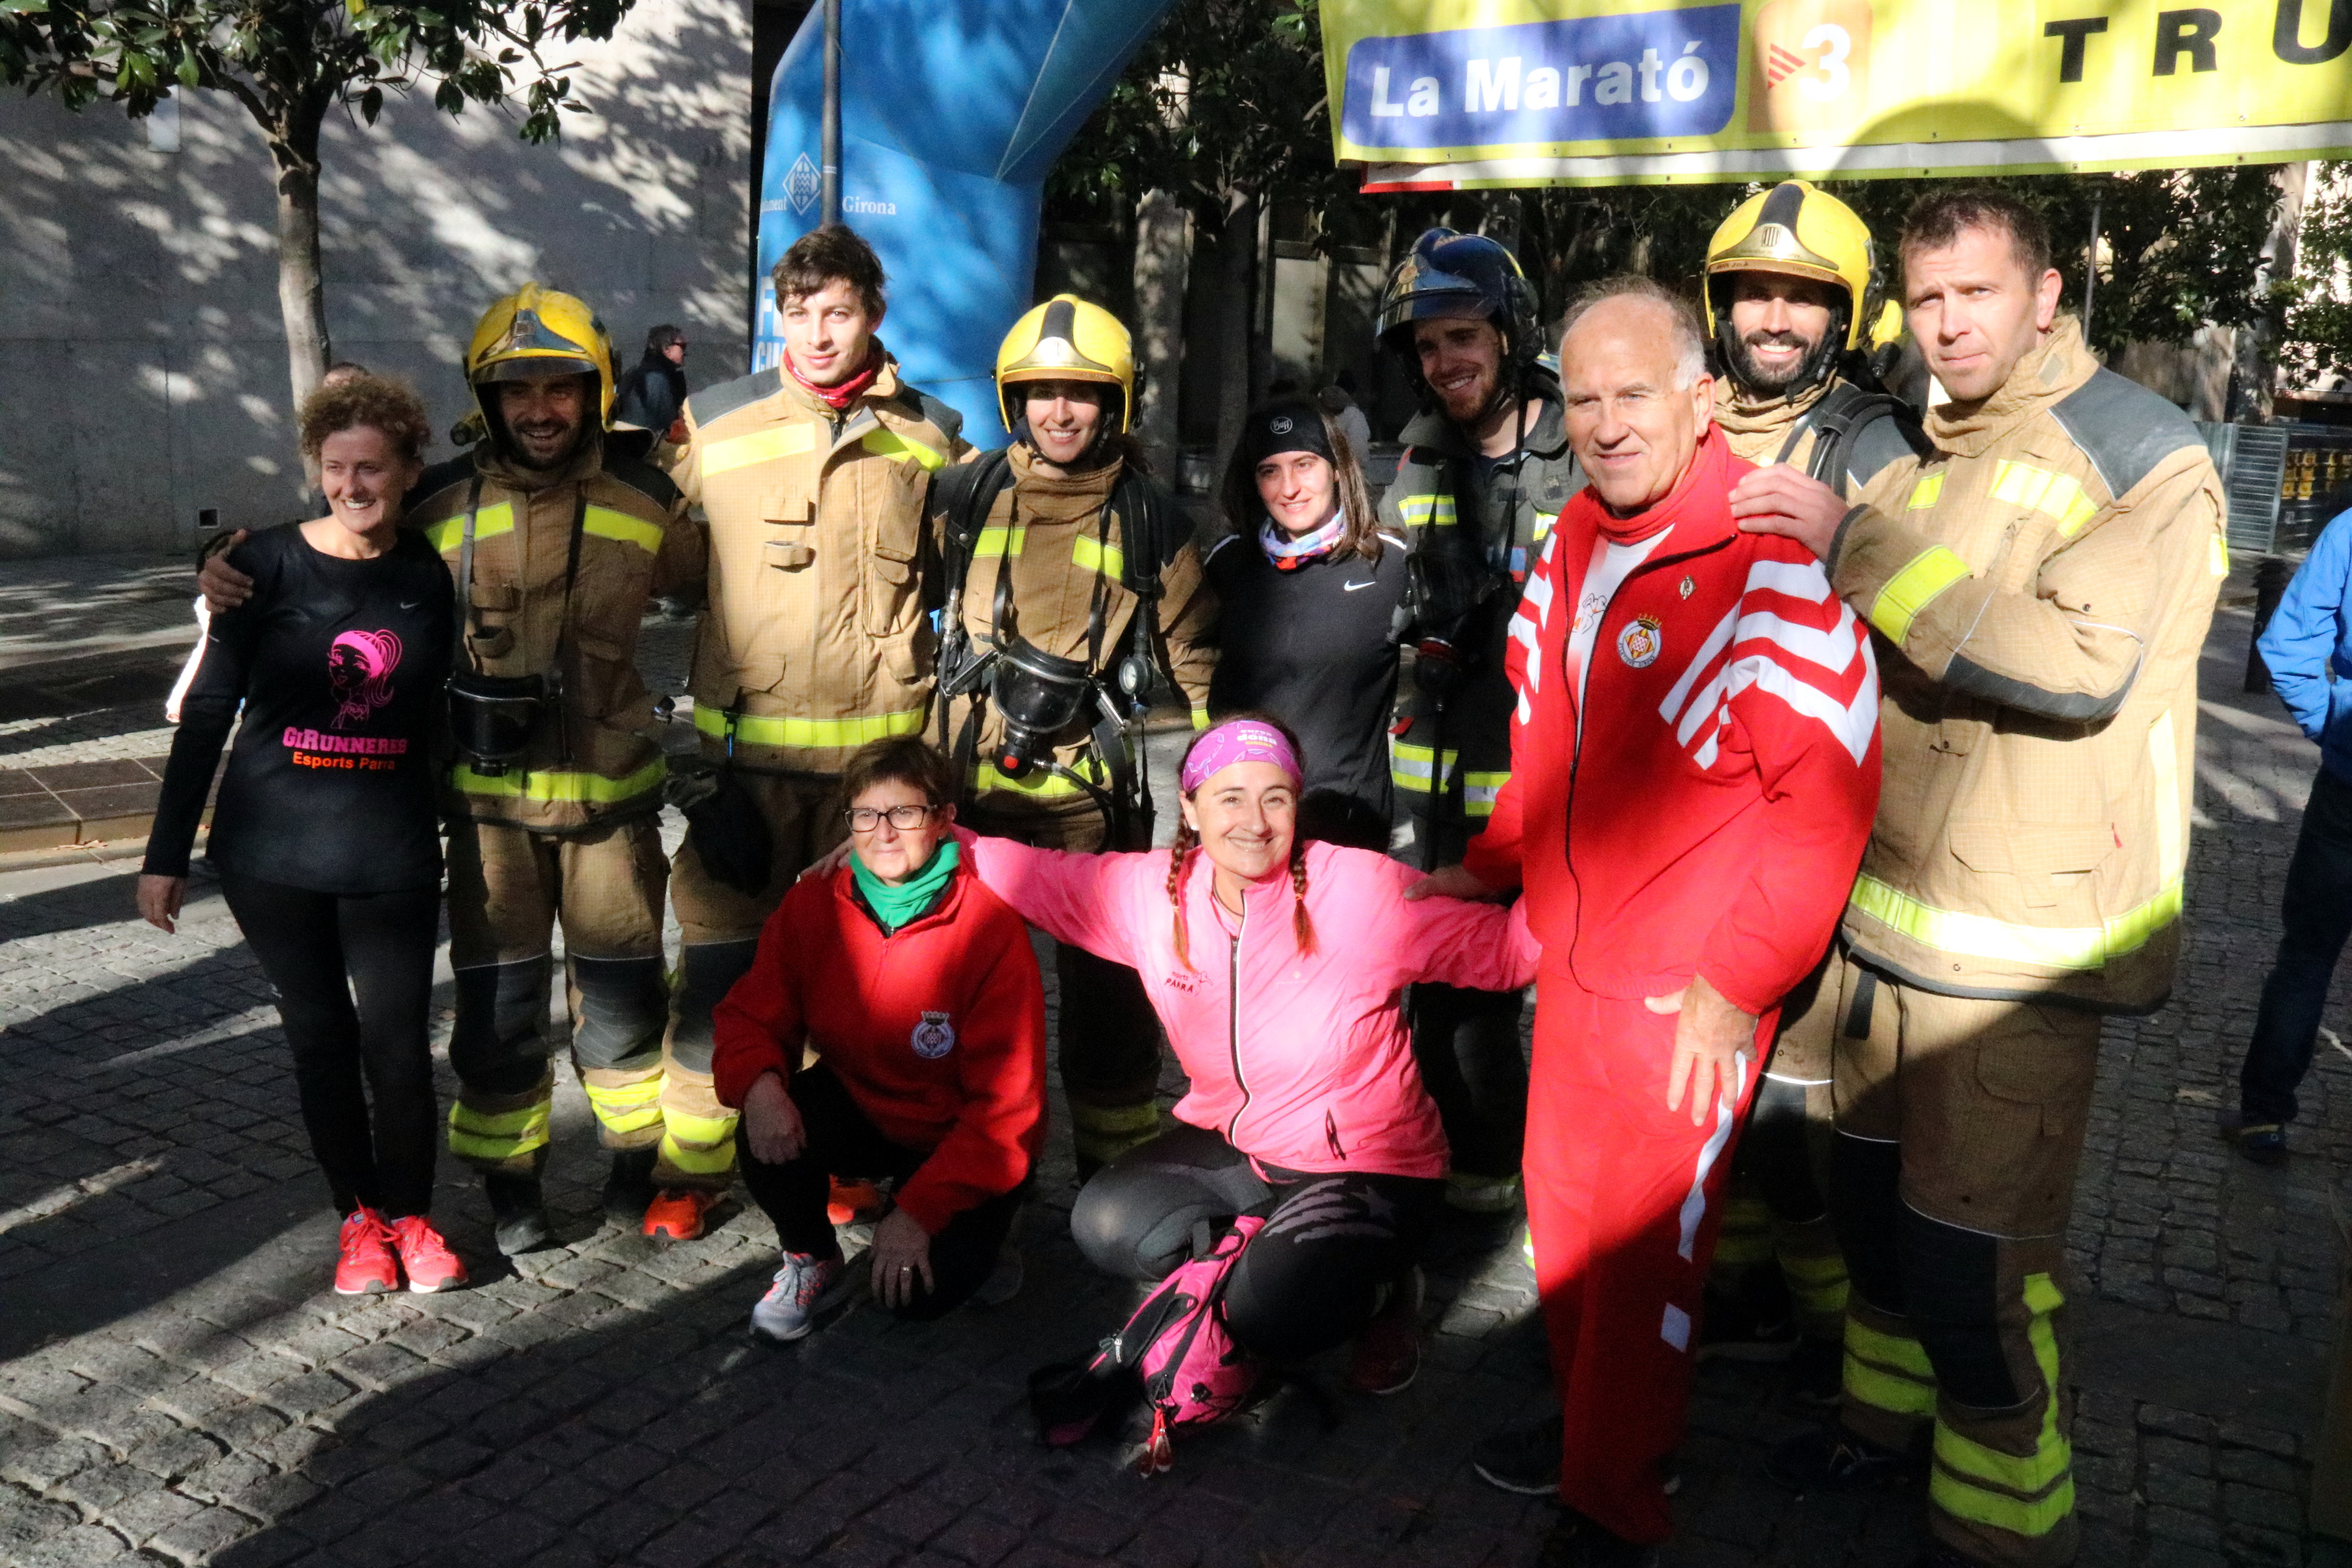 Runners and firefighters during the telethon marathon, one of the activities scheduled for Sunday December 17 2017 (by Gerard Vilà)